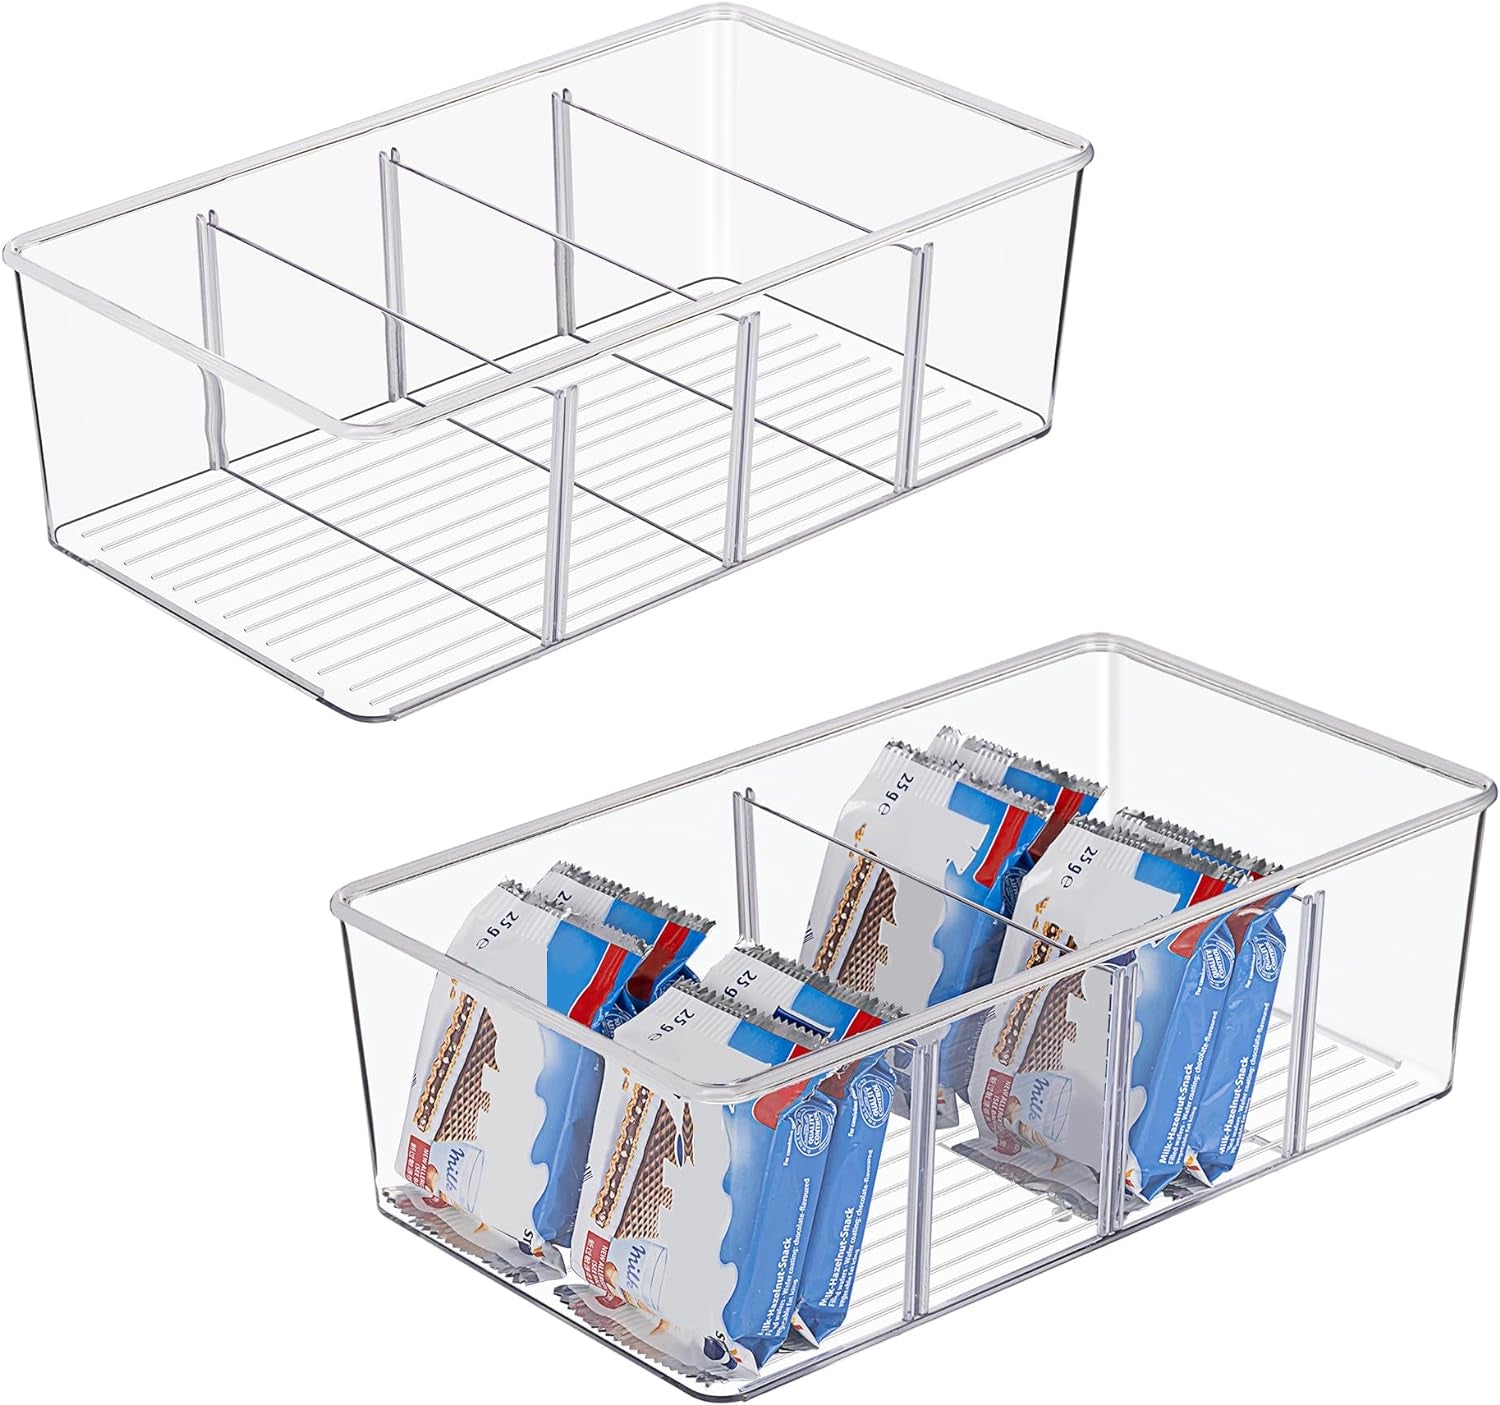 ClearSpace Plastic Pantry Storage Bins with Dividers, 2 Pack